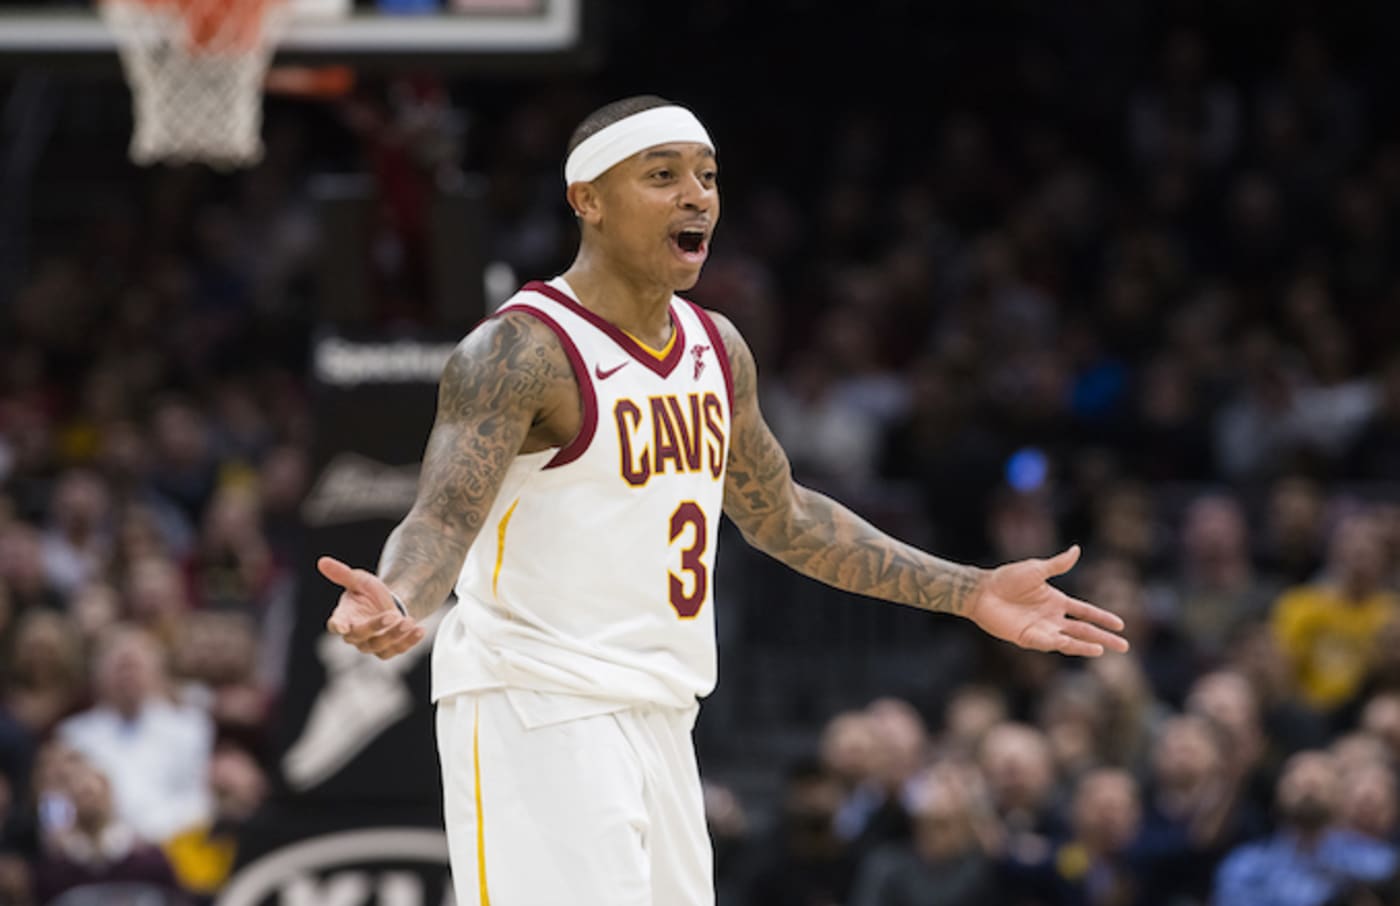 Isaiah Thomas #3 of the Cleveland Cavaliers.